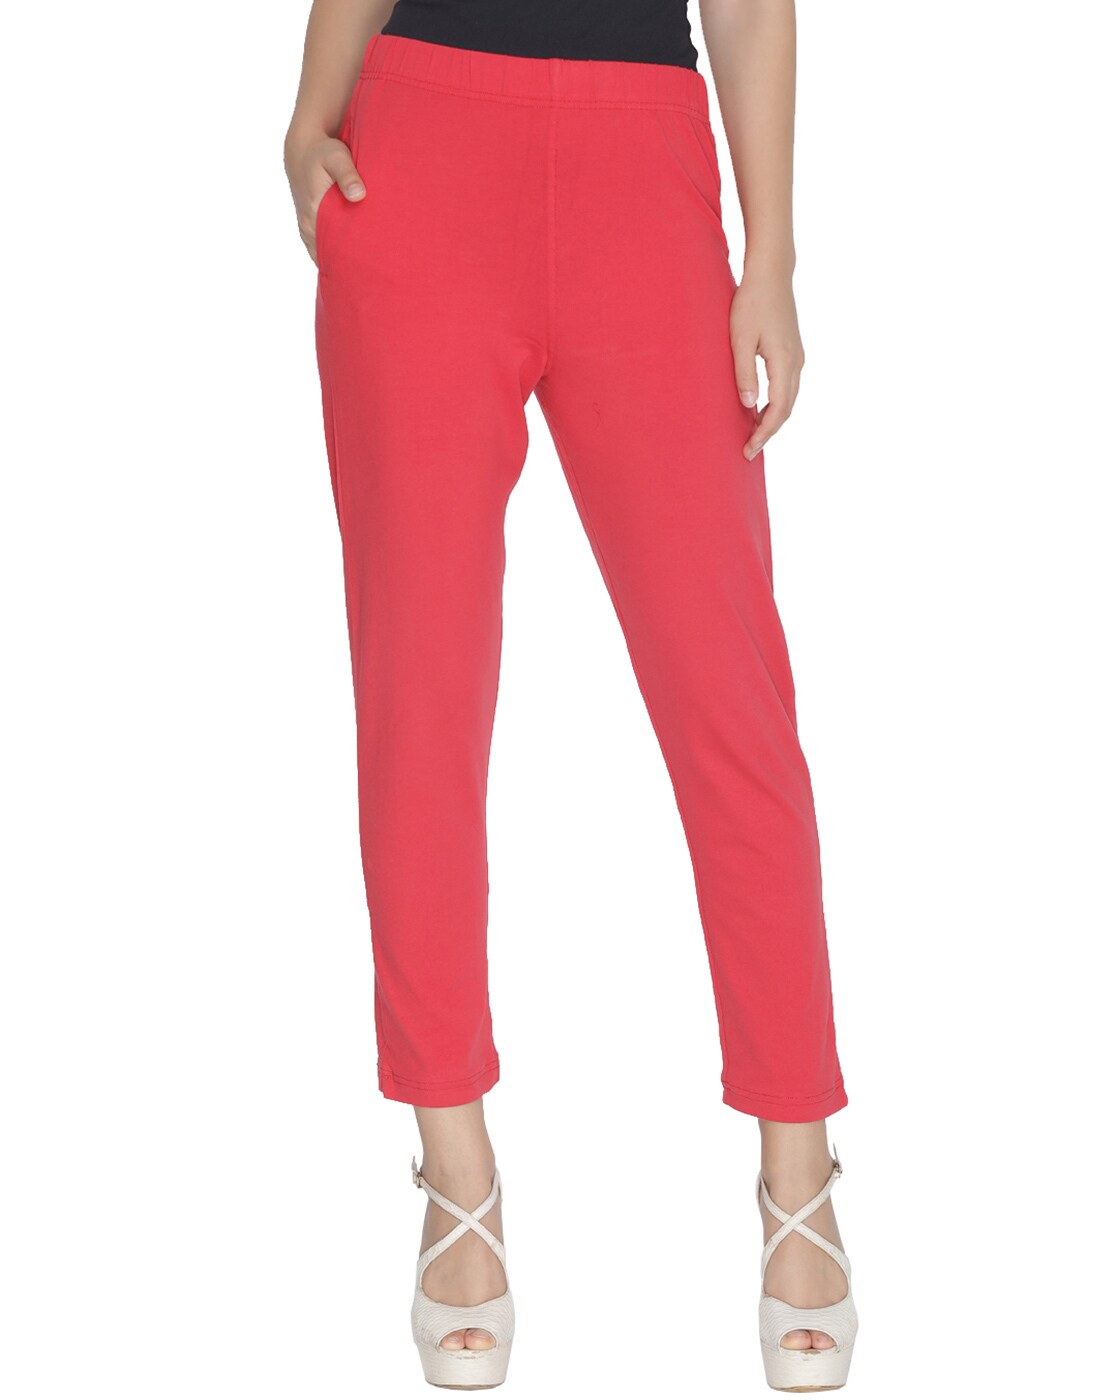 Lyra Women Red Trousers  Buy Lyra Women Red Trousers Online at Best Prices  in India  Flipkartcom